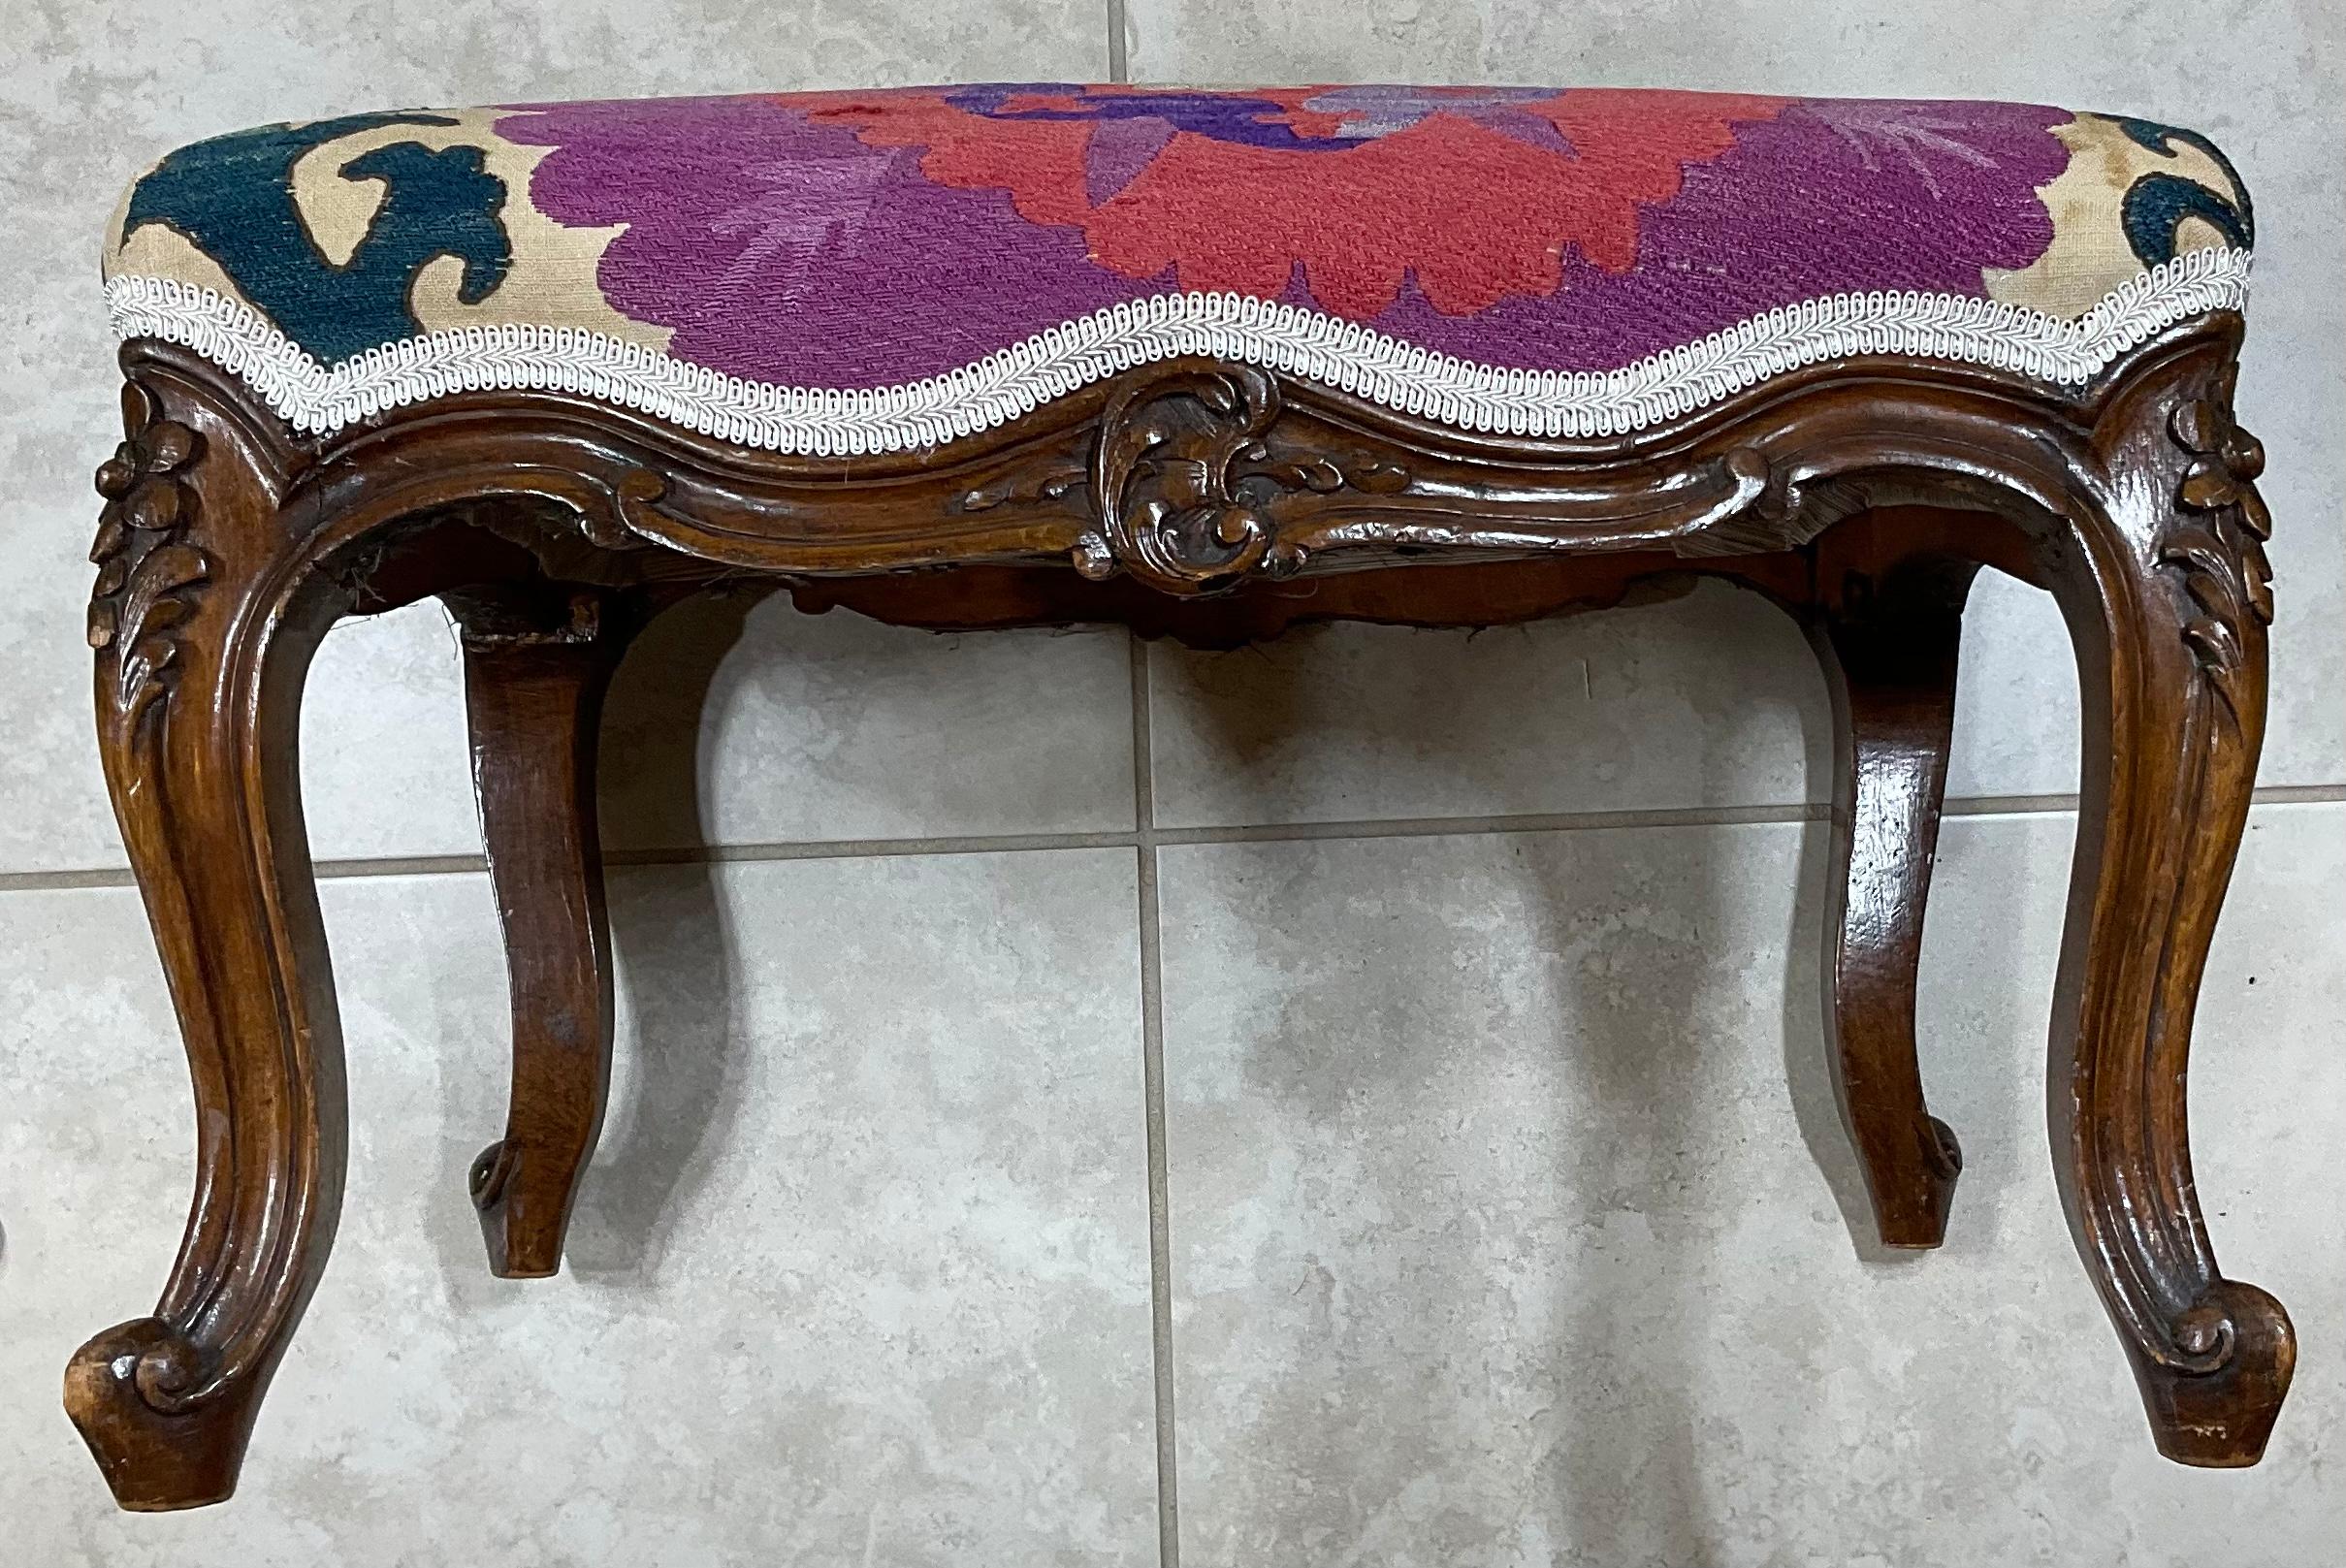 Vintage Foot Stool Upholstered with Antique Suzani Textile In Good Condition For Sale In Delray Beach, FL